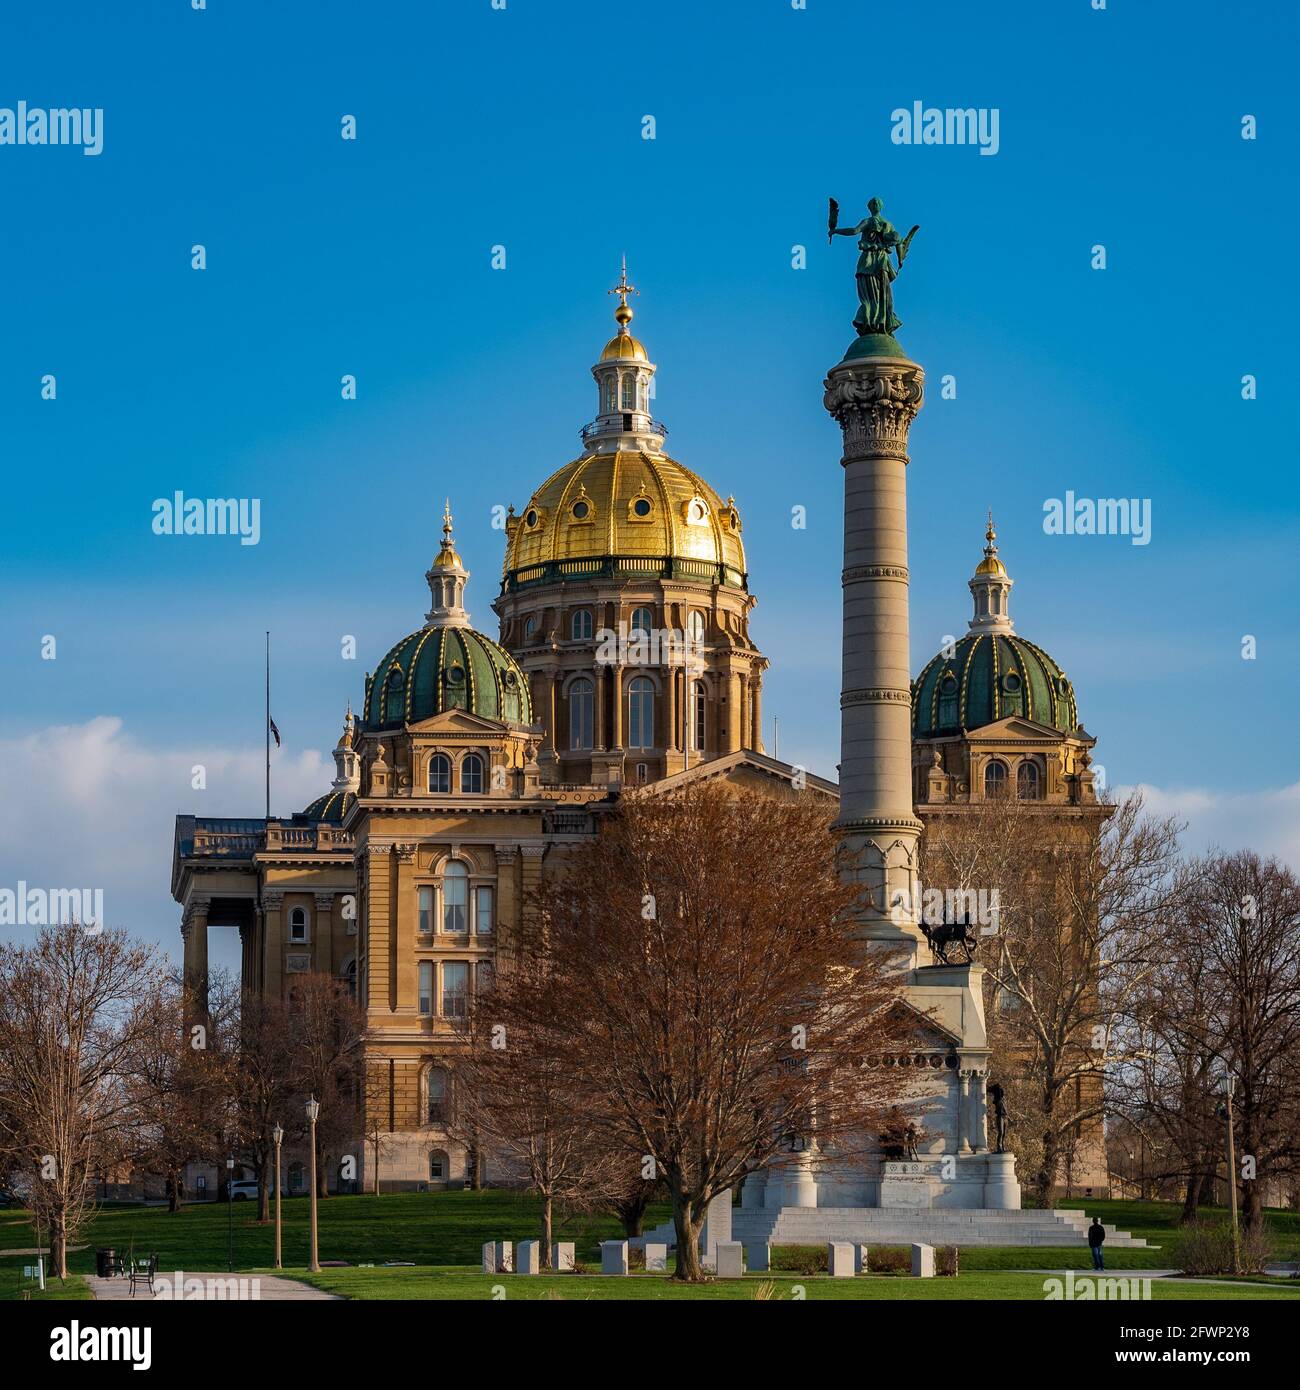 Iowa State Capitol and Soldiers' and Sailors' Monument in Des Moines, Iowa Stock Photo